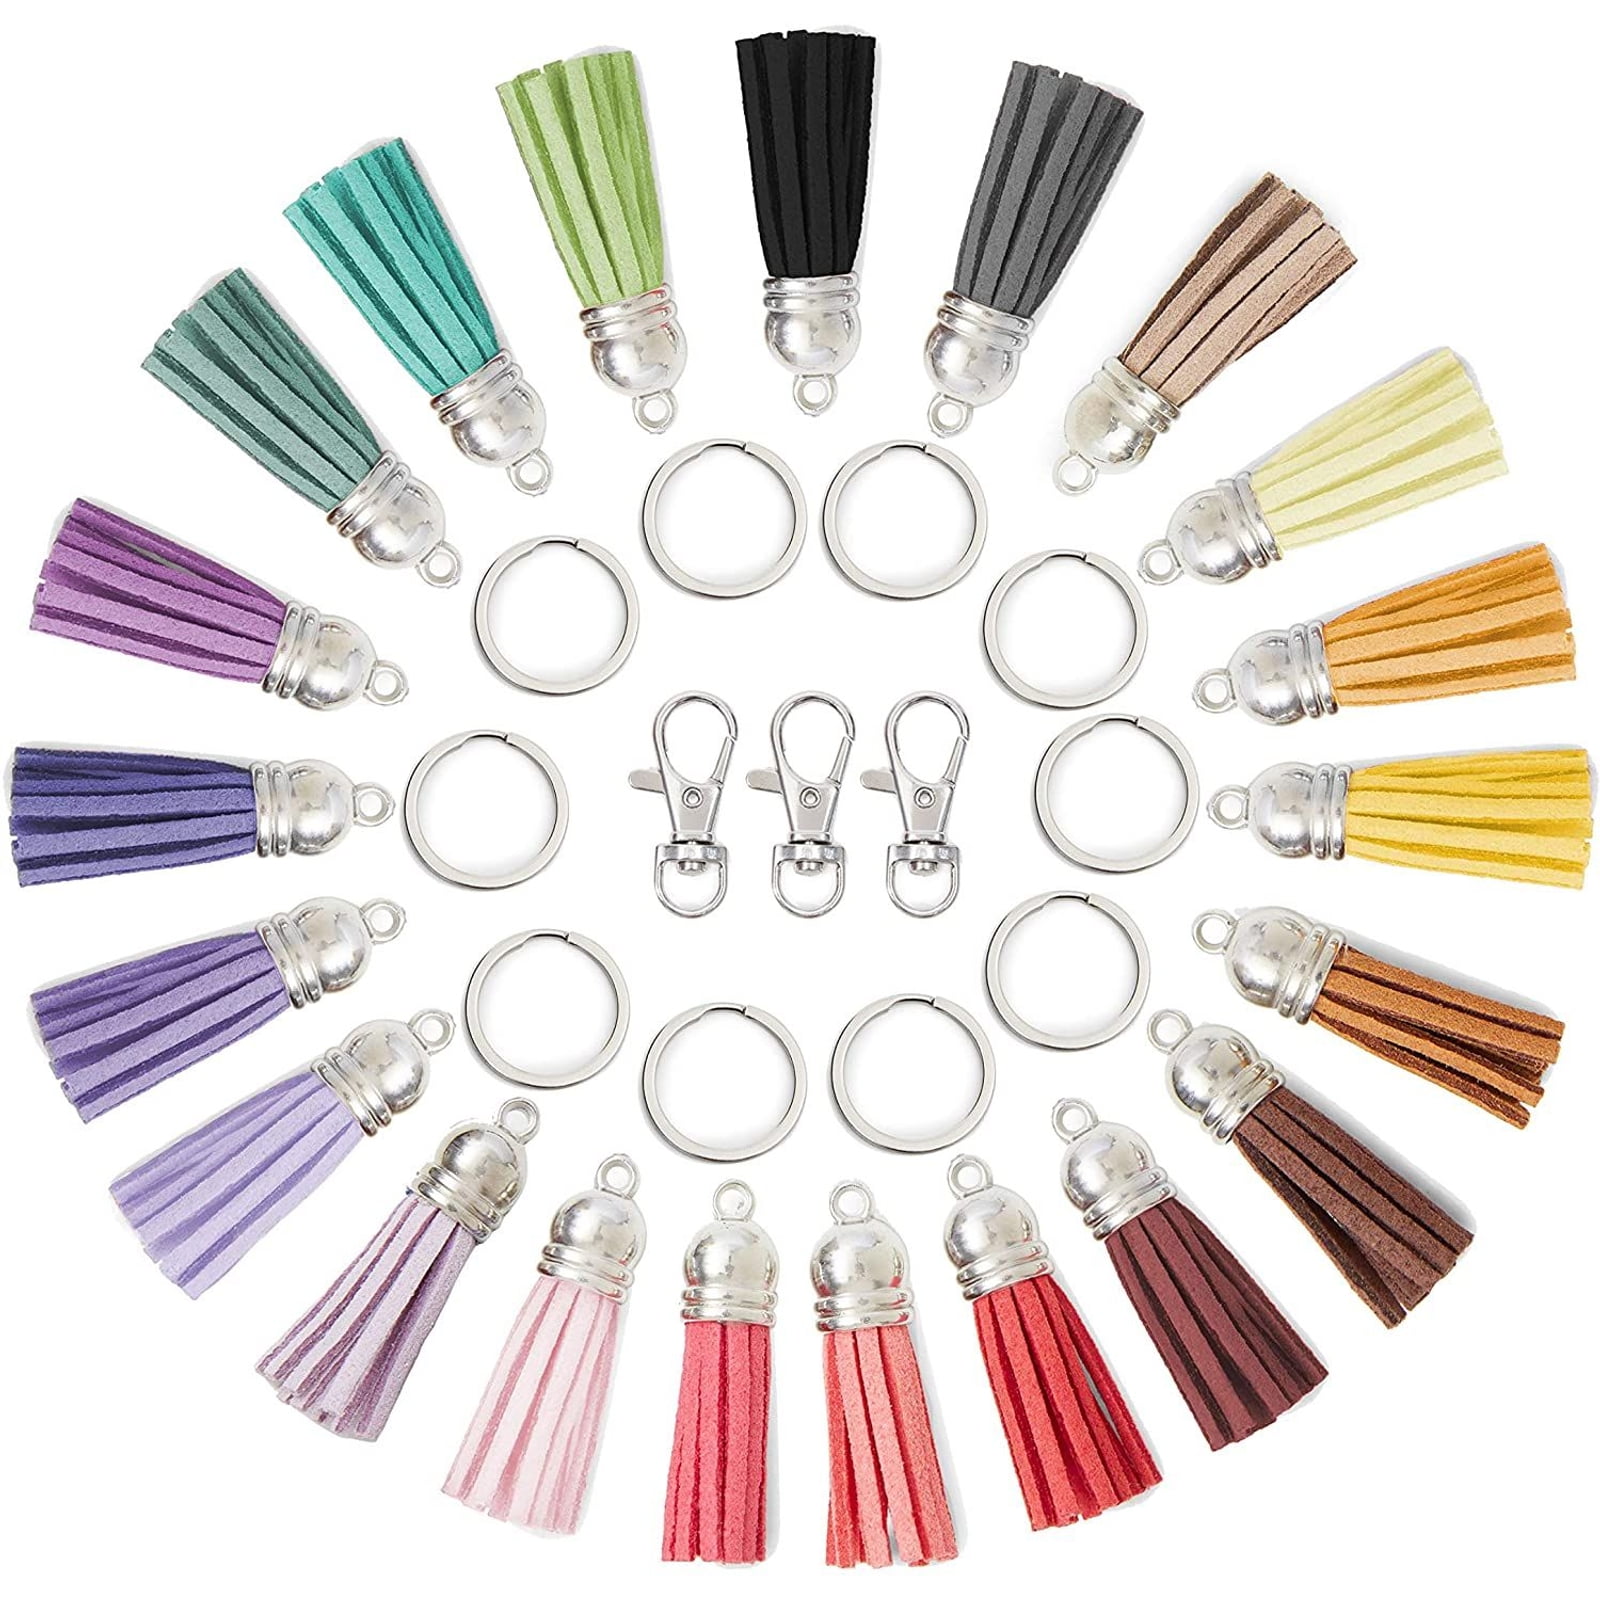 10 x Assorted Colours Suede Leather Tassel Pendant For Key Chains/Cellphone/Bag